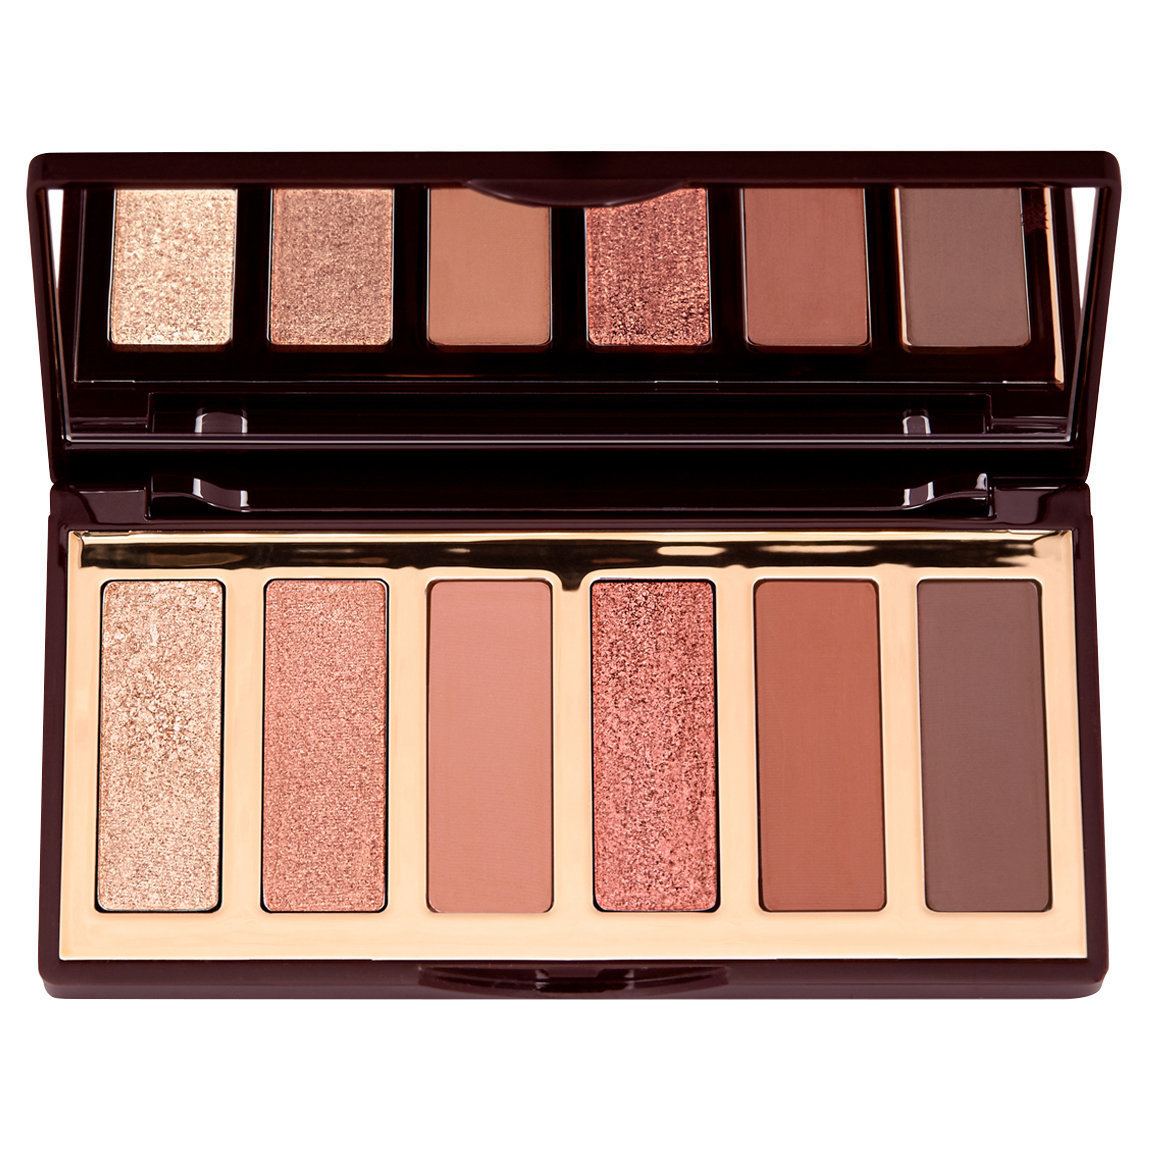 Free Easy Eye Palette in Charlotte Darling with qualifying Charlotte Tilbury purchase